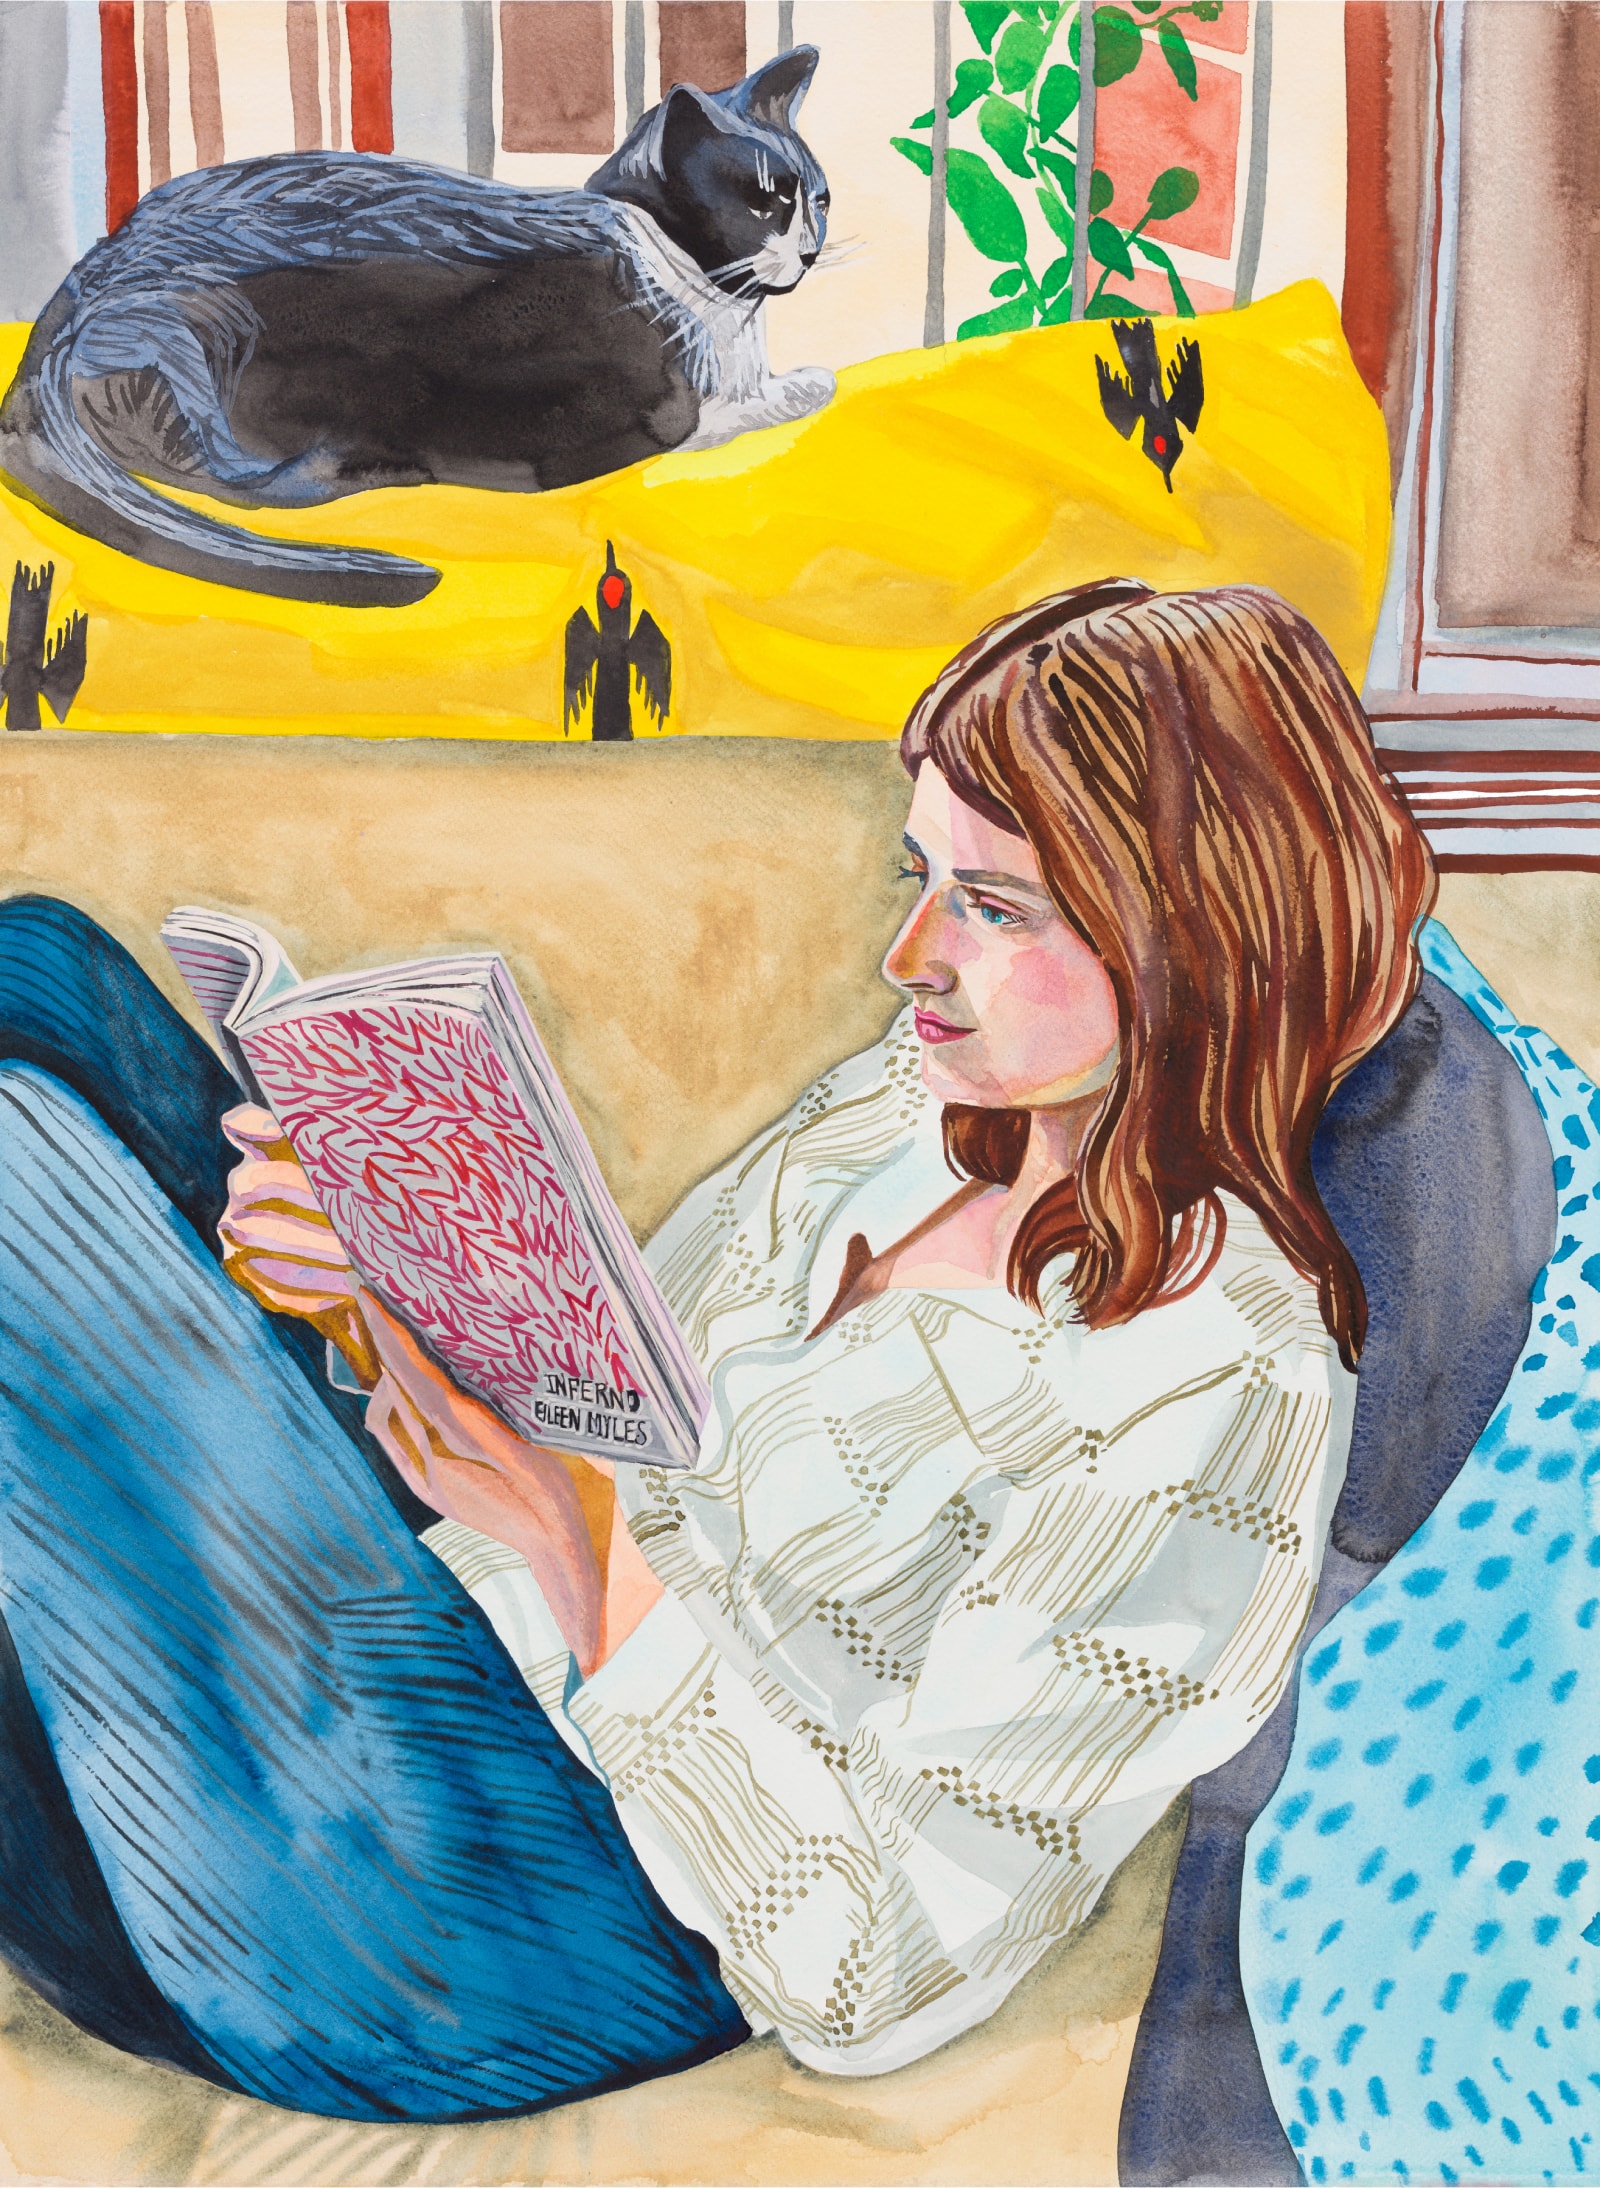 Nisenbaum’s “Alex” featuring a woman reading Eileen Mile’s “Inferno” on a couch with a cat seated above